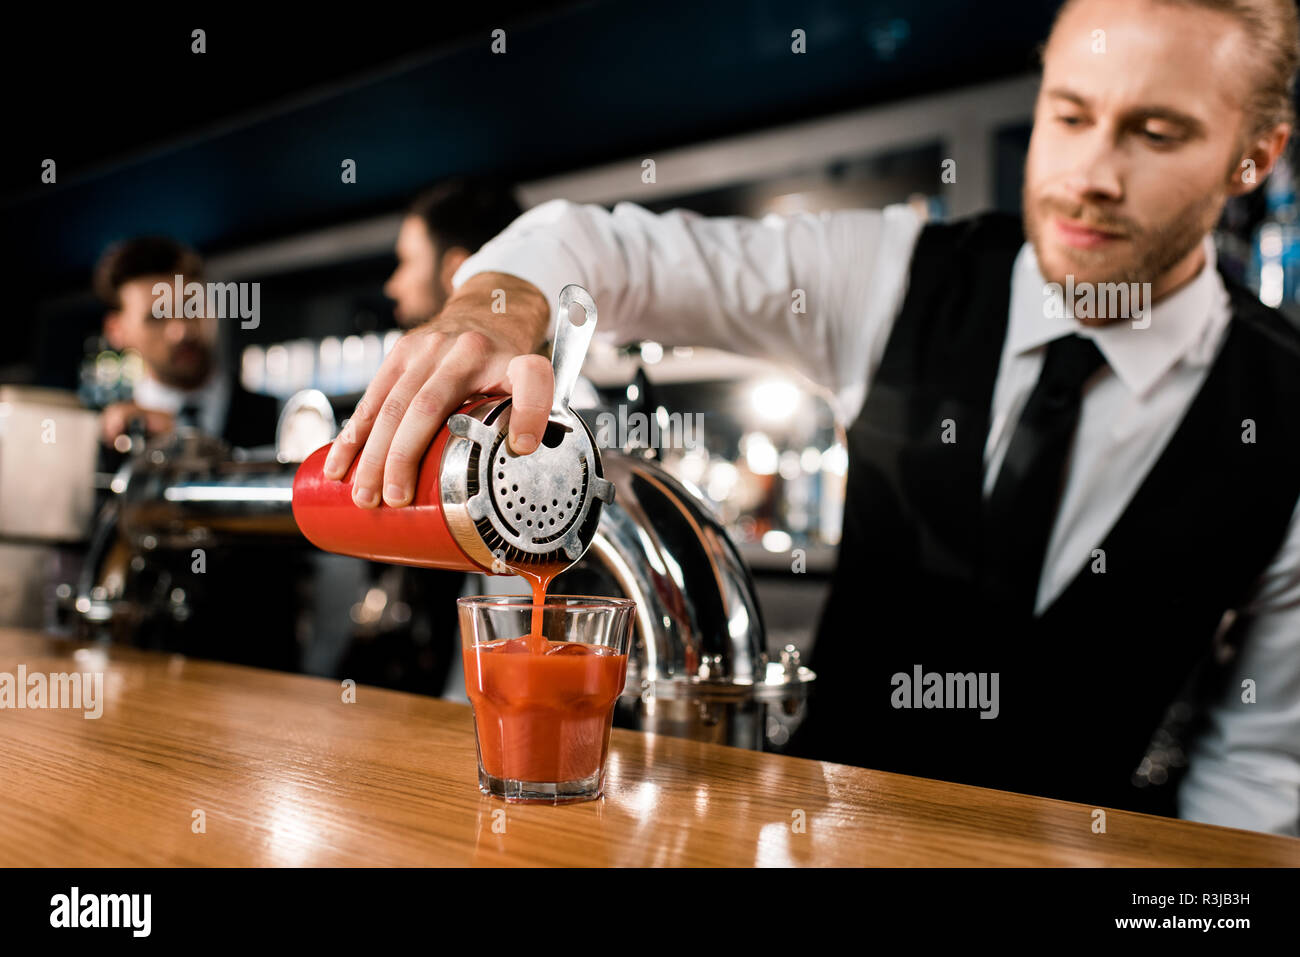 Barman pouring drink in glass on wooden counter Stock Photo